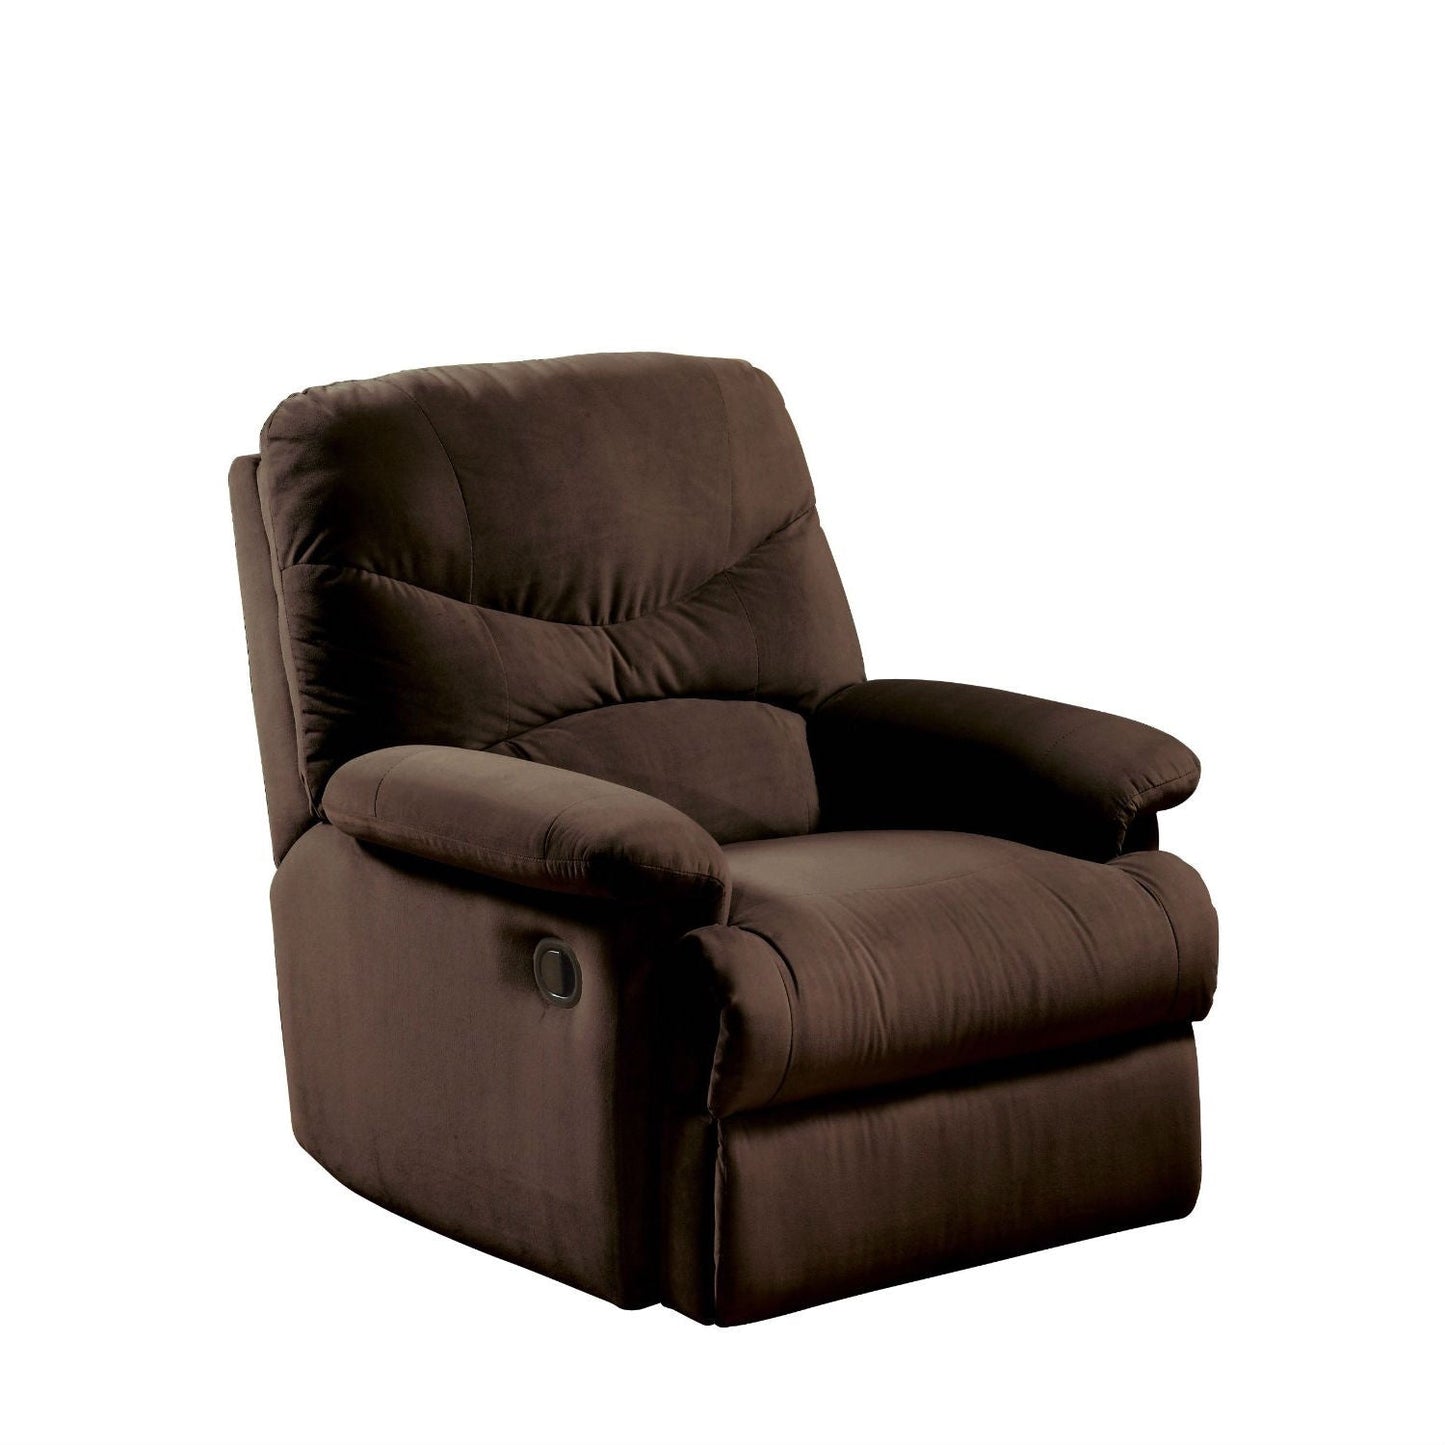 Living Room > Recliners And Leather Recliner - Comfortable Recliner Chair In Chocolate Brown Microfiber Upholstery